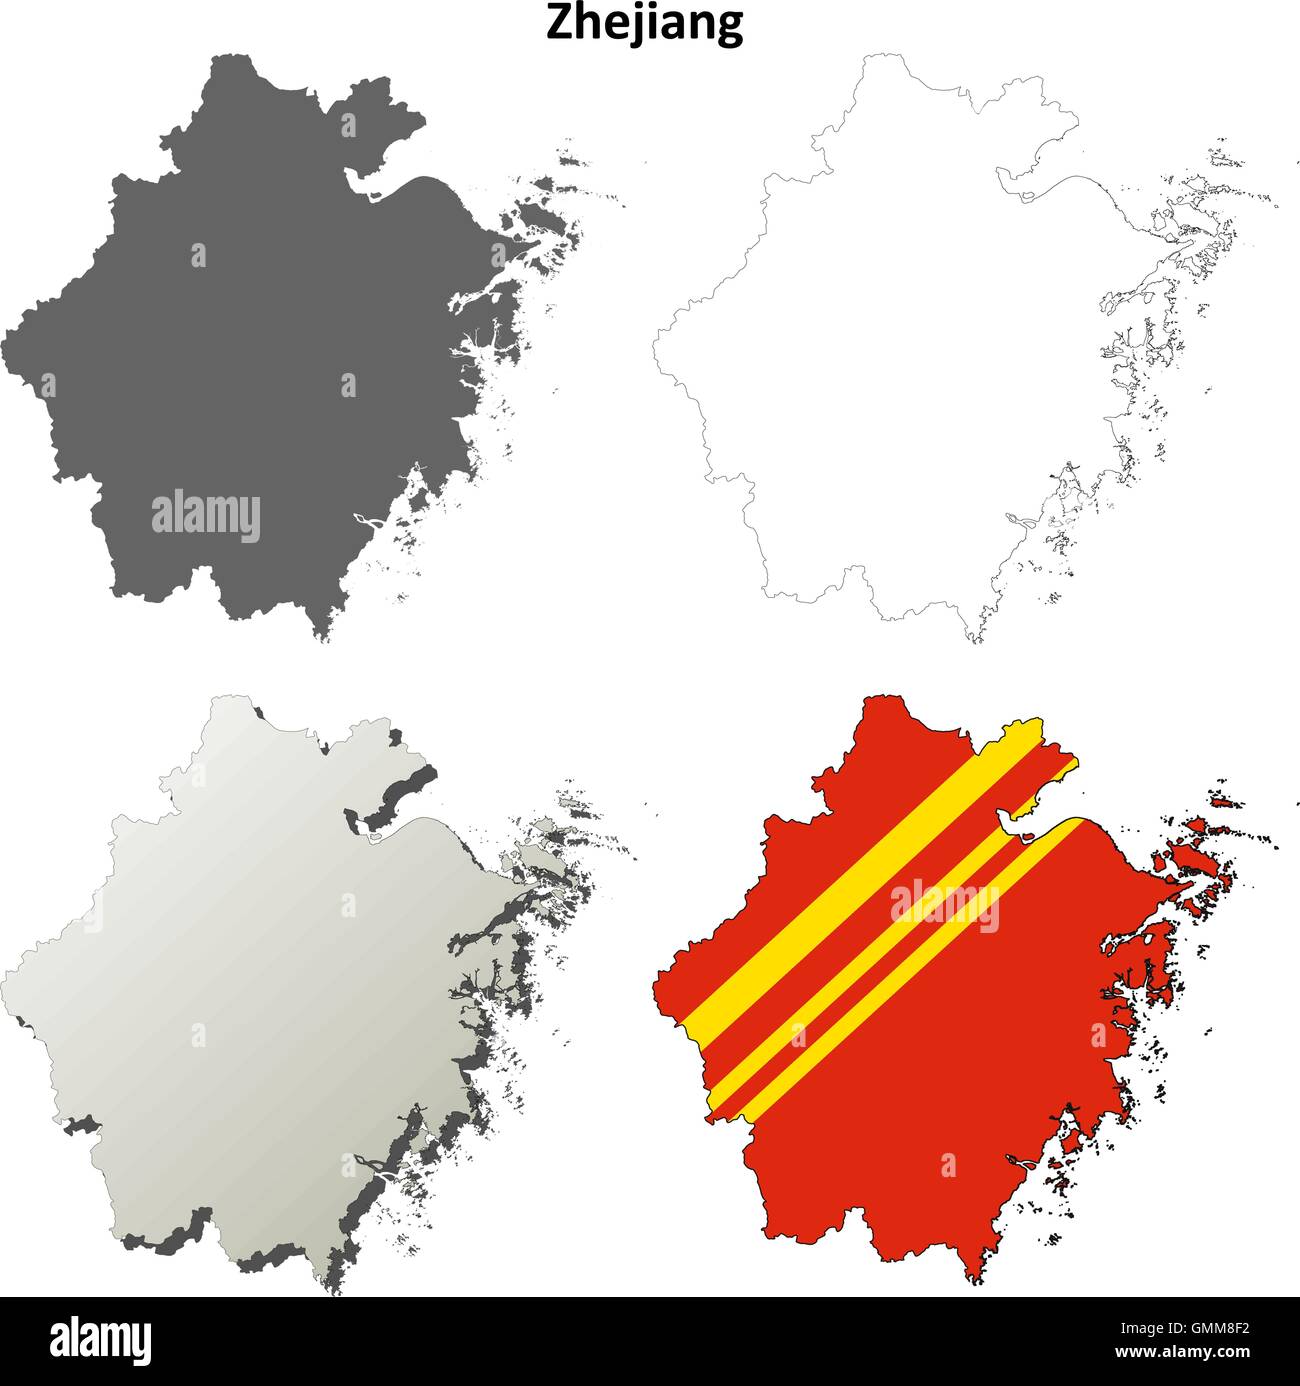 Zhejiang blank outline map set Stock Vector